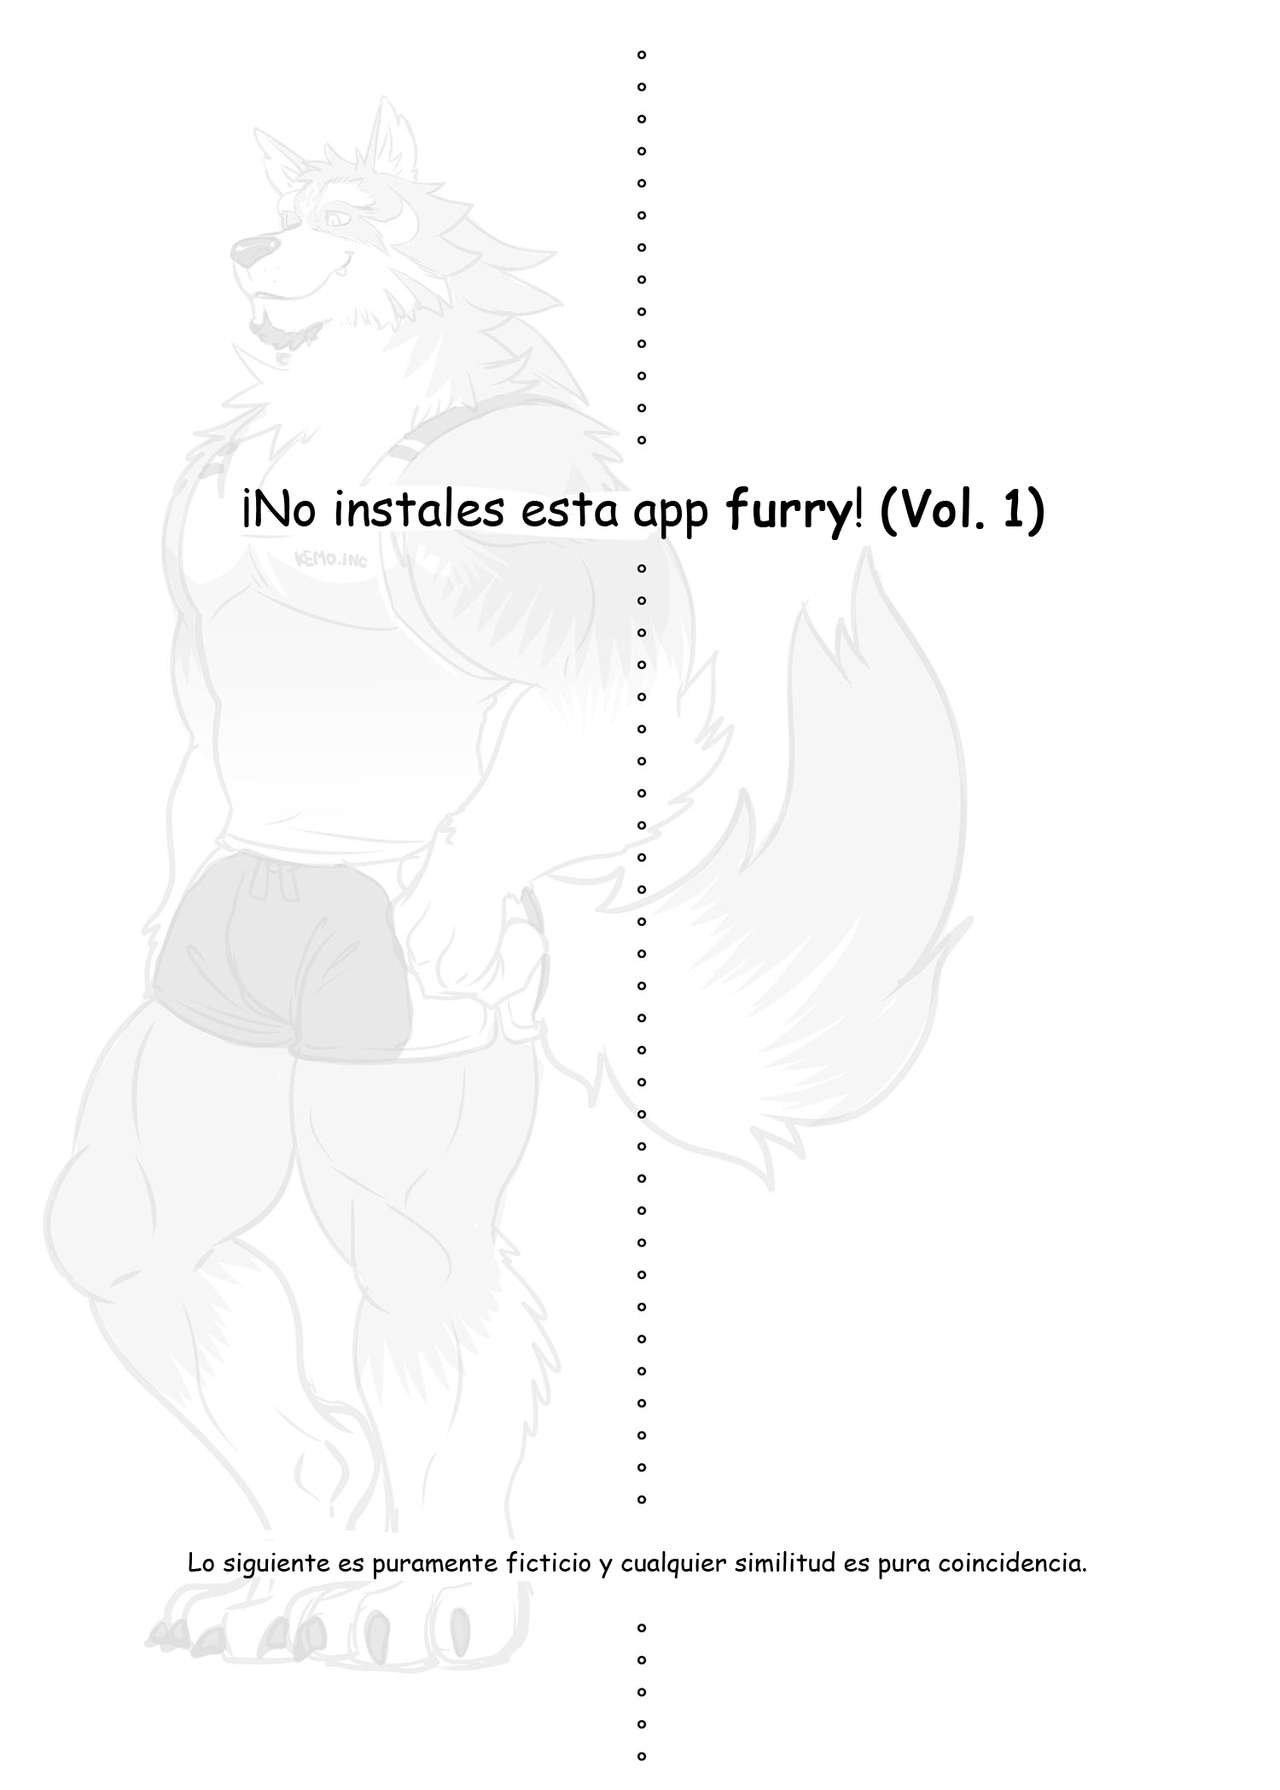 Do Not Install this FURRY App! - 1